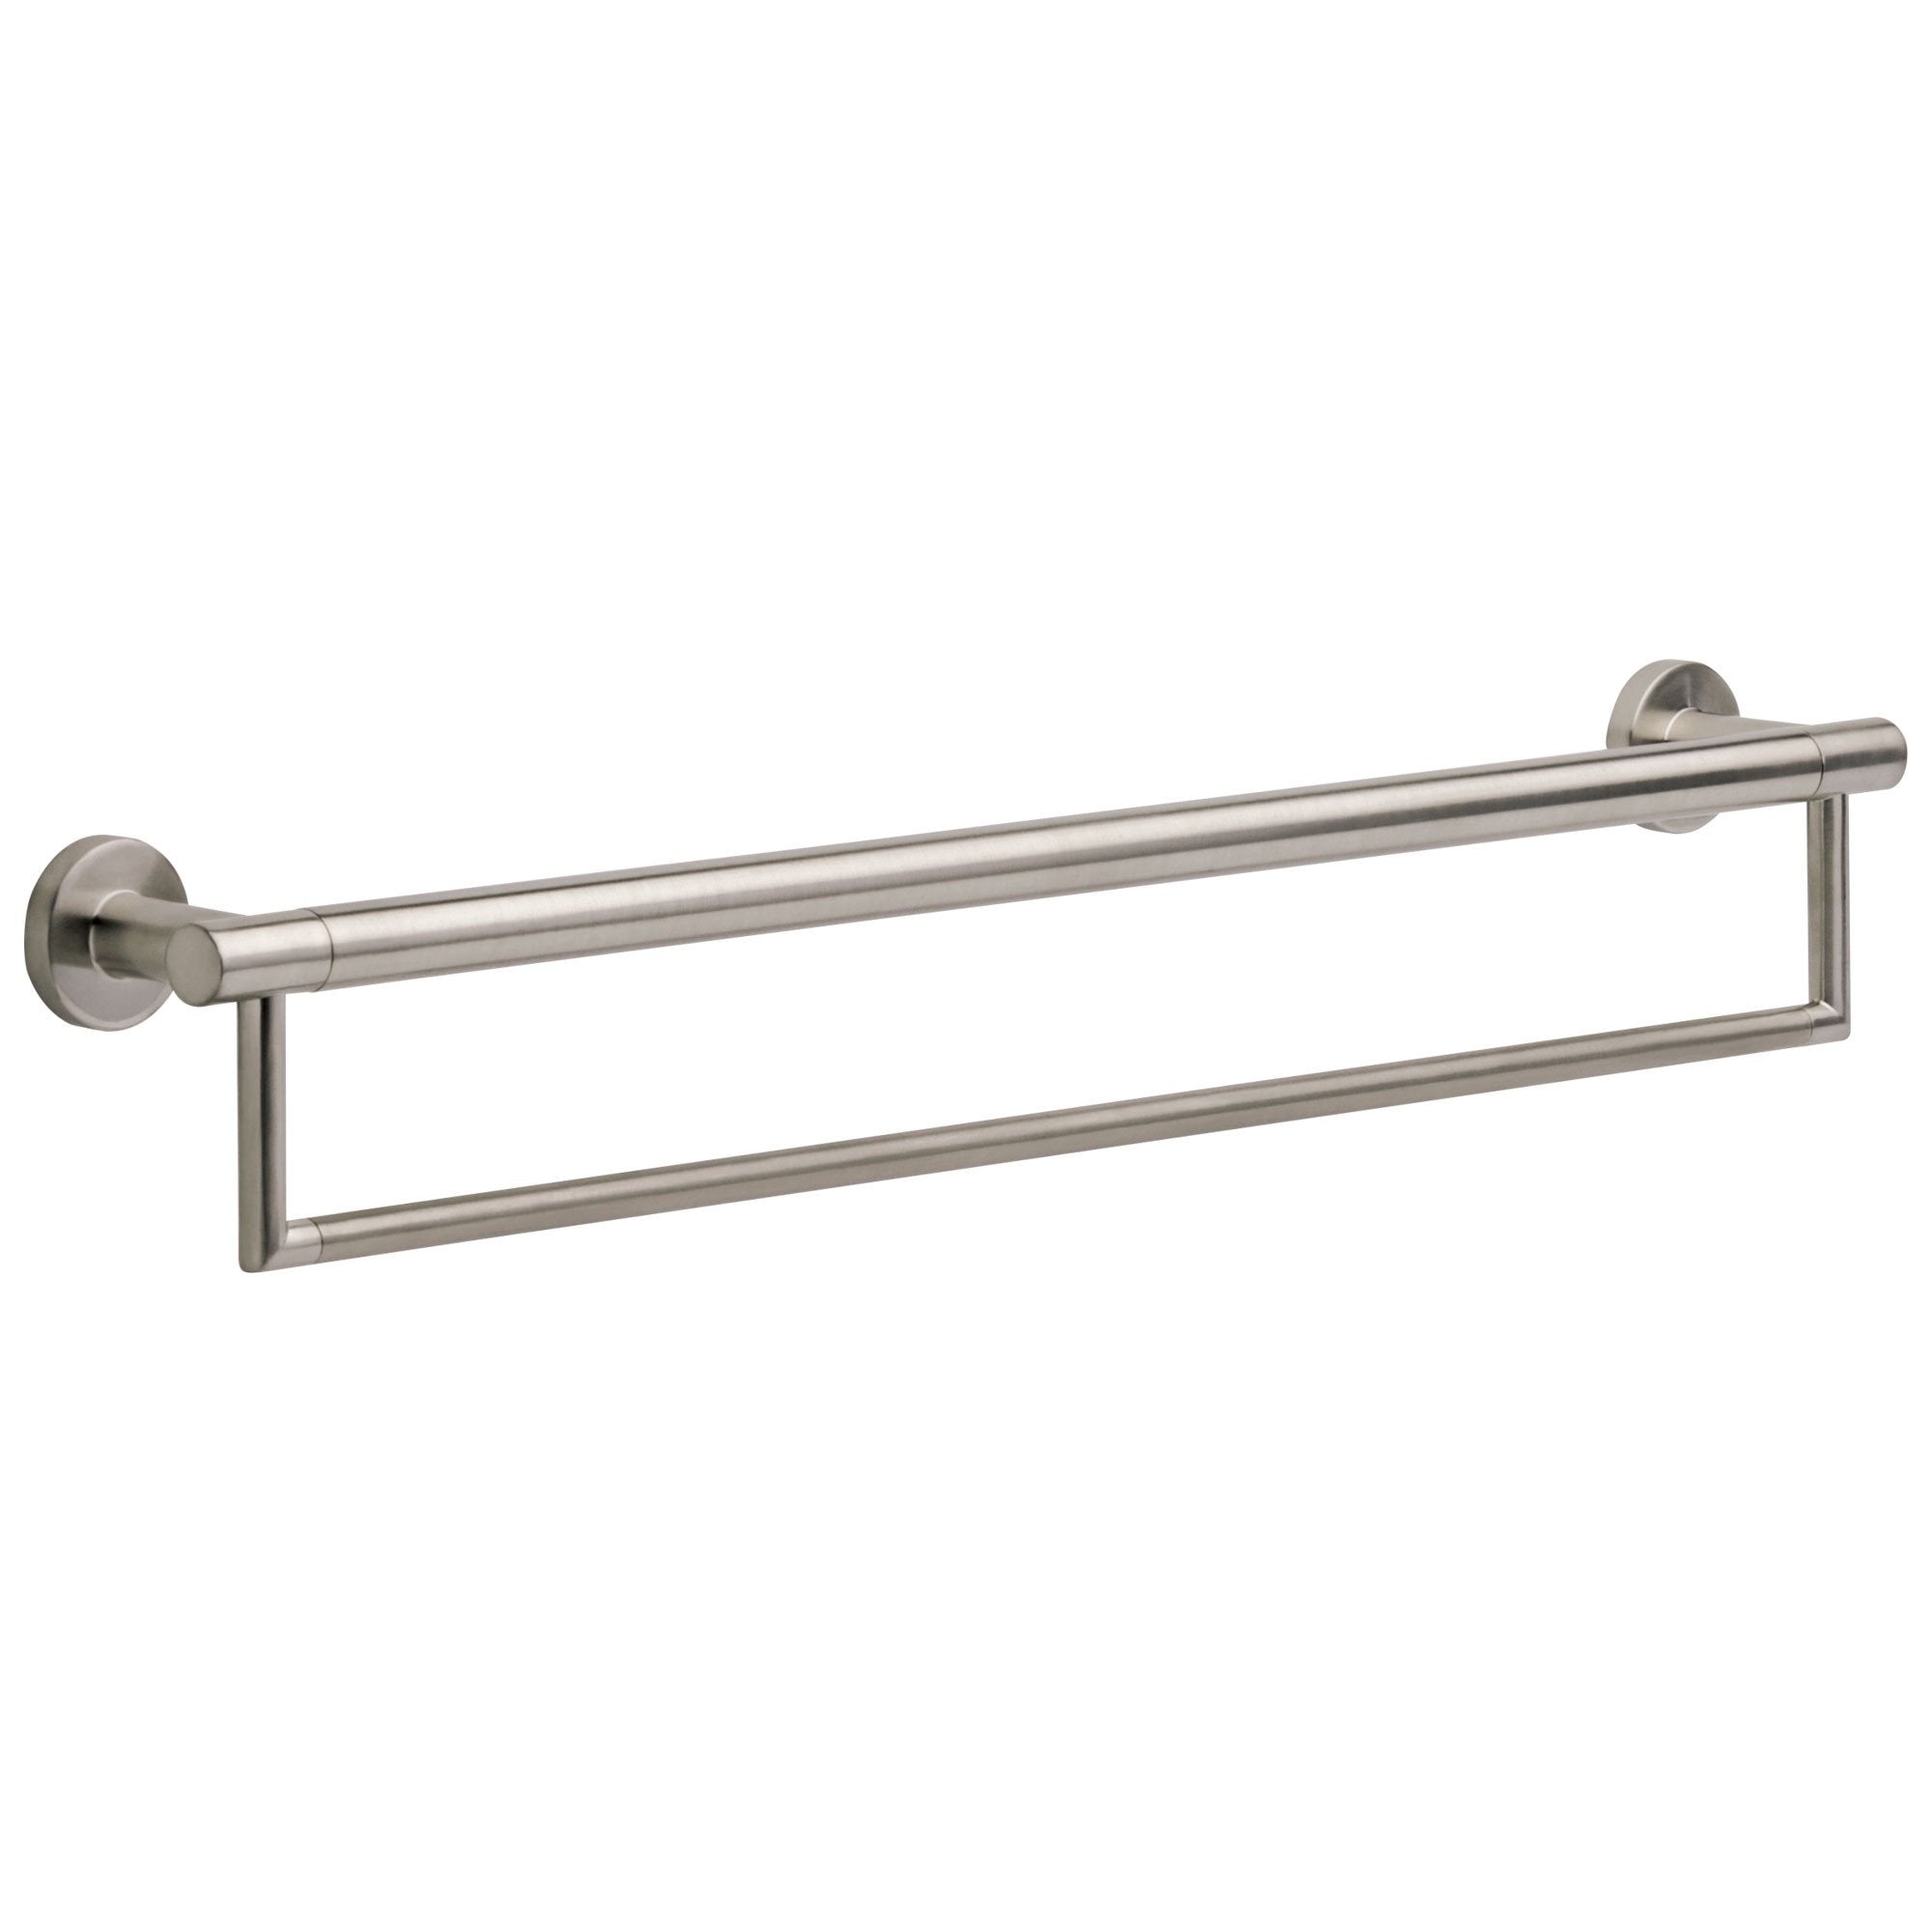 Delta Bath Safety Collection Stainless Steel Finish Contemporary 24" Towel Bar with Assist Grab Bar 660992